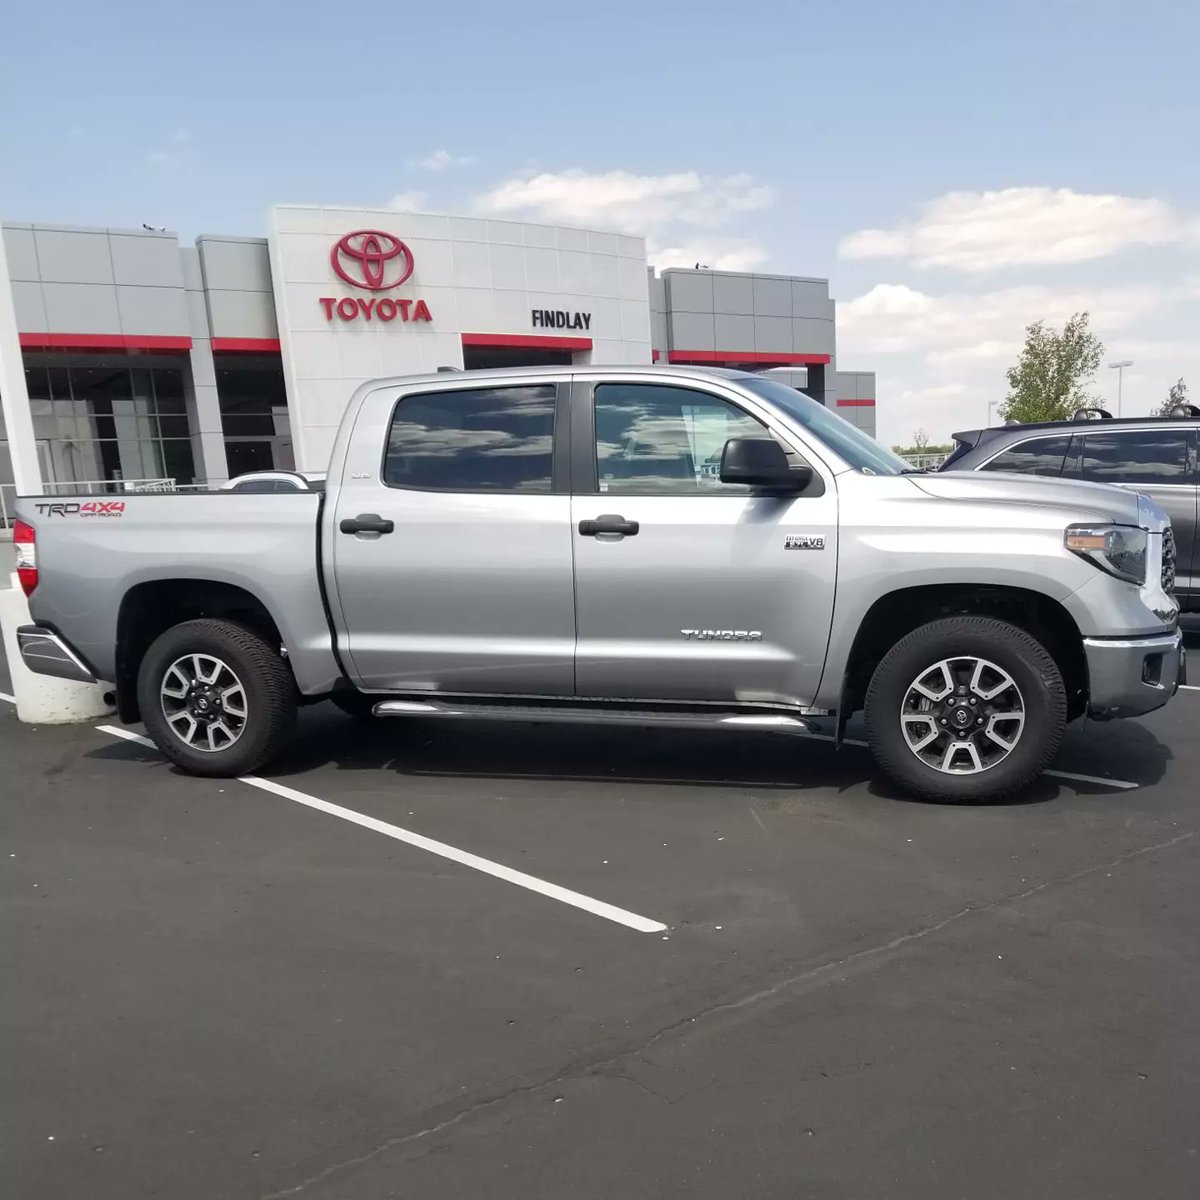 How about this one!? 
2021 #toyota #tundra #SR5 Crew Cab Pickup 6-Speed #AutomaticTransmission 
#V8 #4WD #silverskymetallic #activecruisecontrol #electronicstabilitycontrol #cleanCARFAX🦊 #oneowner #miles are #belowmarketaverage 
#PRESCOTTAZ 
$52,000